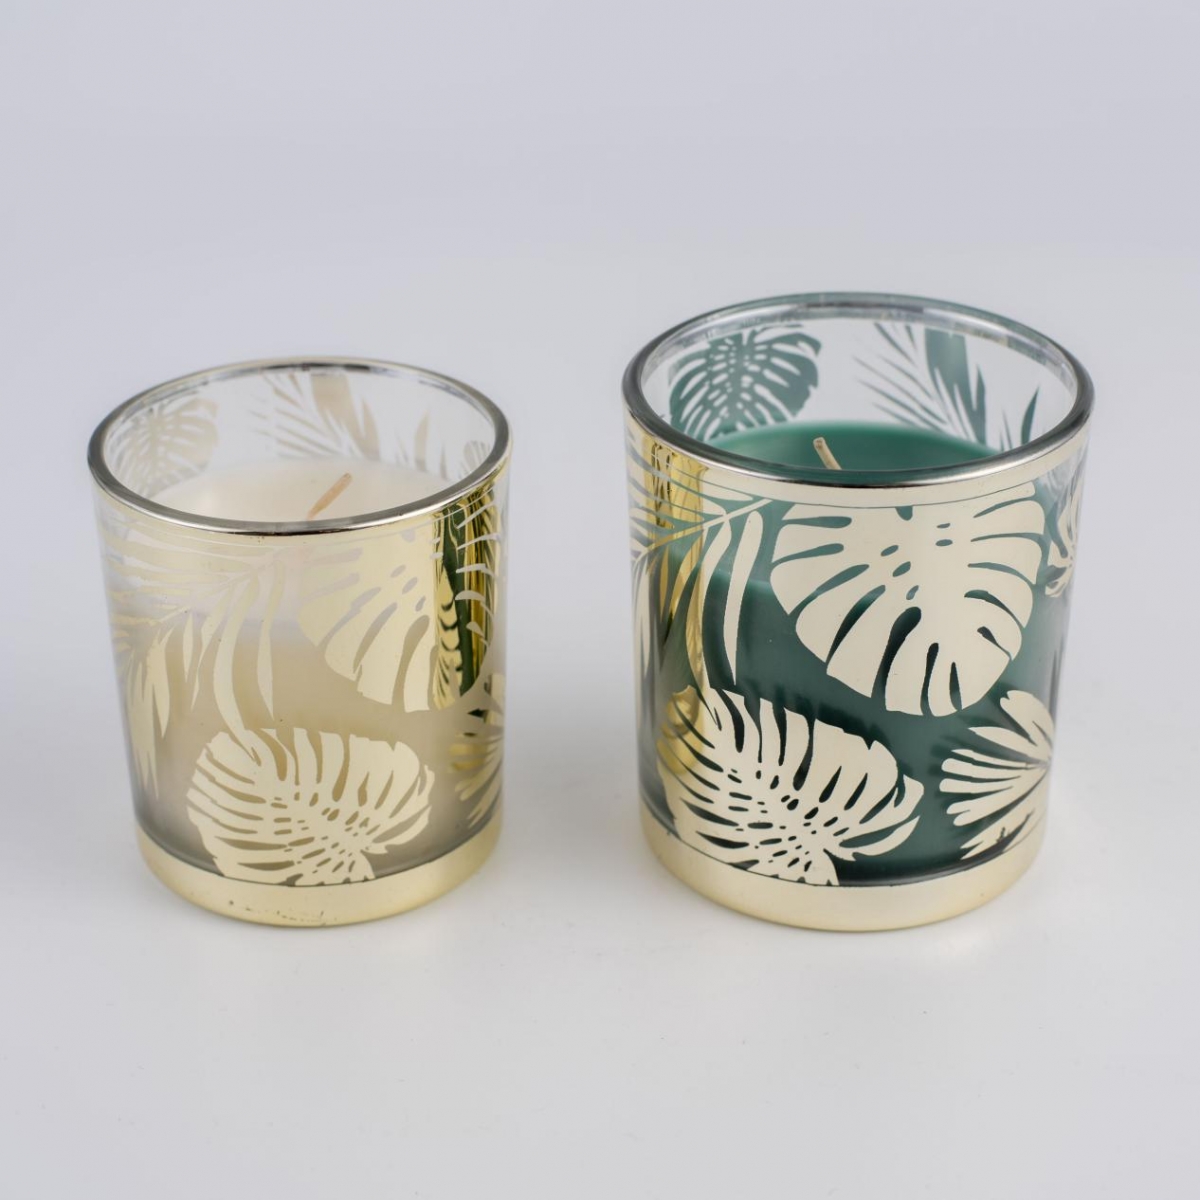 Scented Candles :Monstera ,Engraving On Glass ,Botanical Candles ,China Factory ,Cheapest Price-HOWCANDLE-Candles,Scented Candles,Aromatherapy Candles,Soy Candles,Vegan Candles,Jar Candles,Pillar Candles,Candle Gift Sets,Essential Oils,Reed Diffuser,Candle Holder,